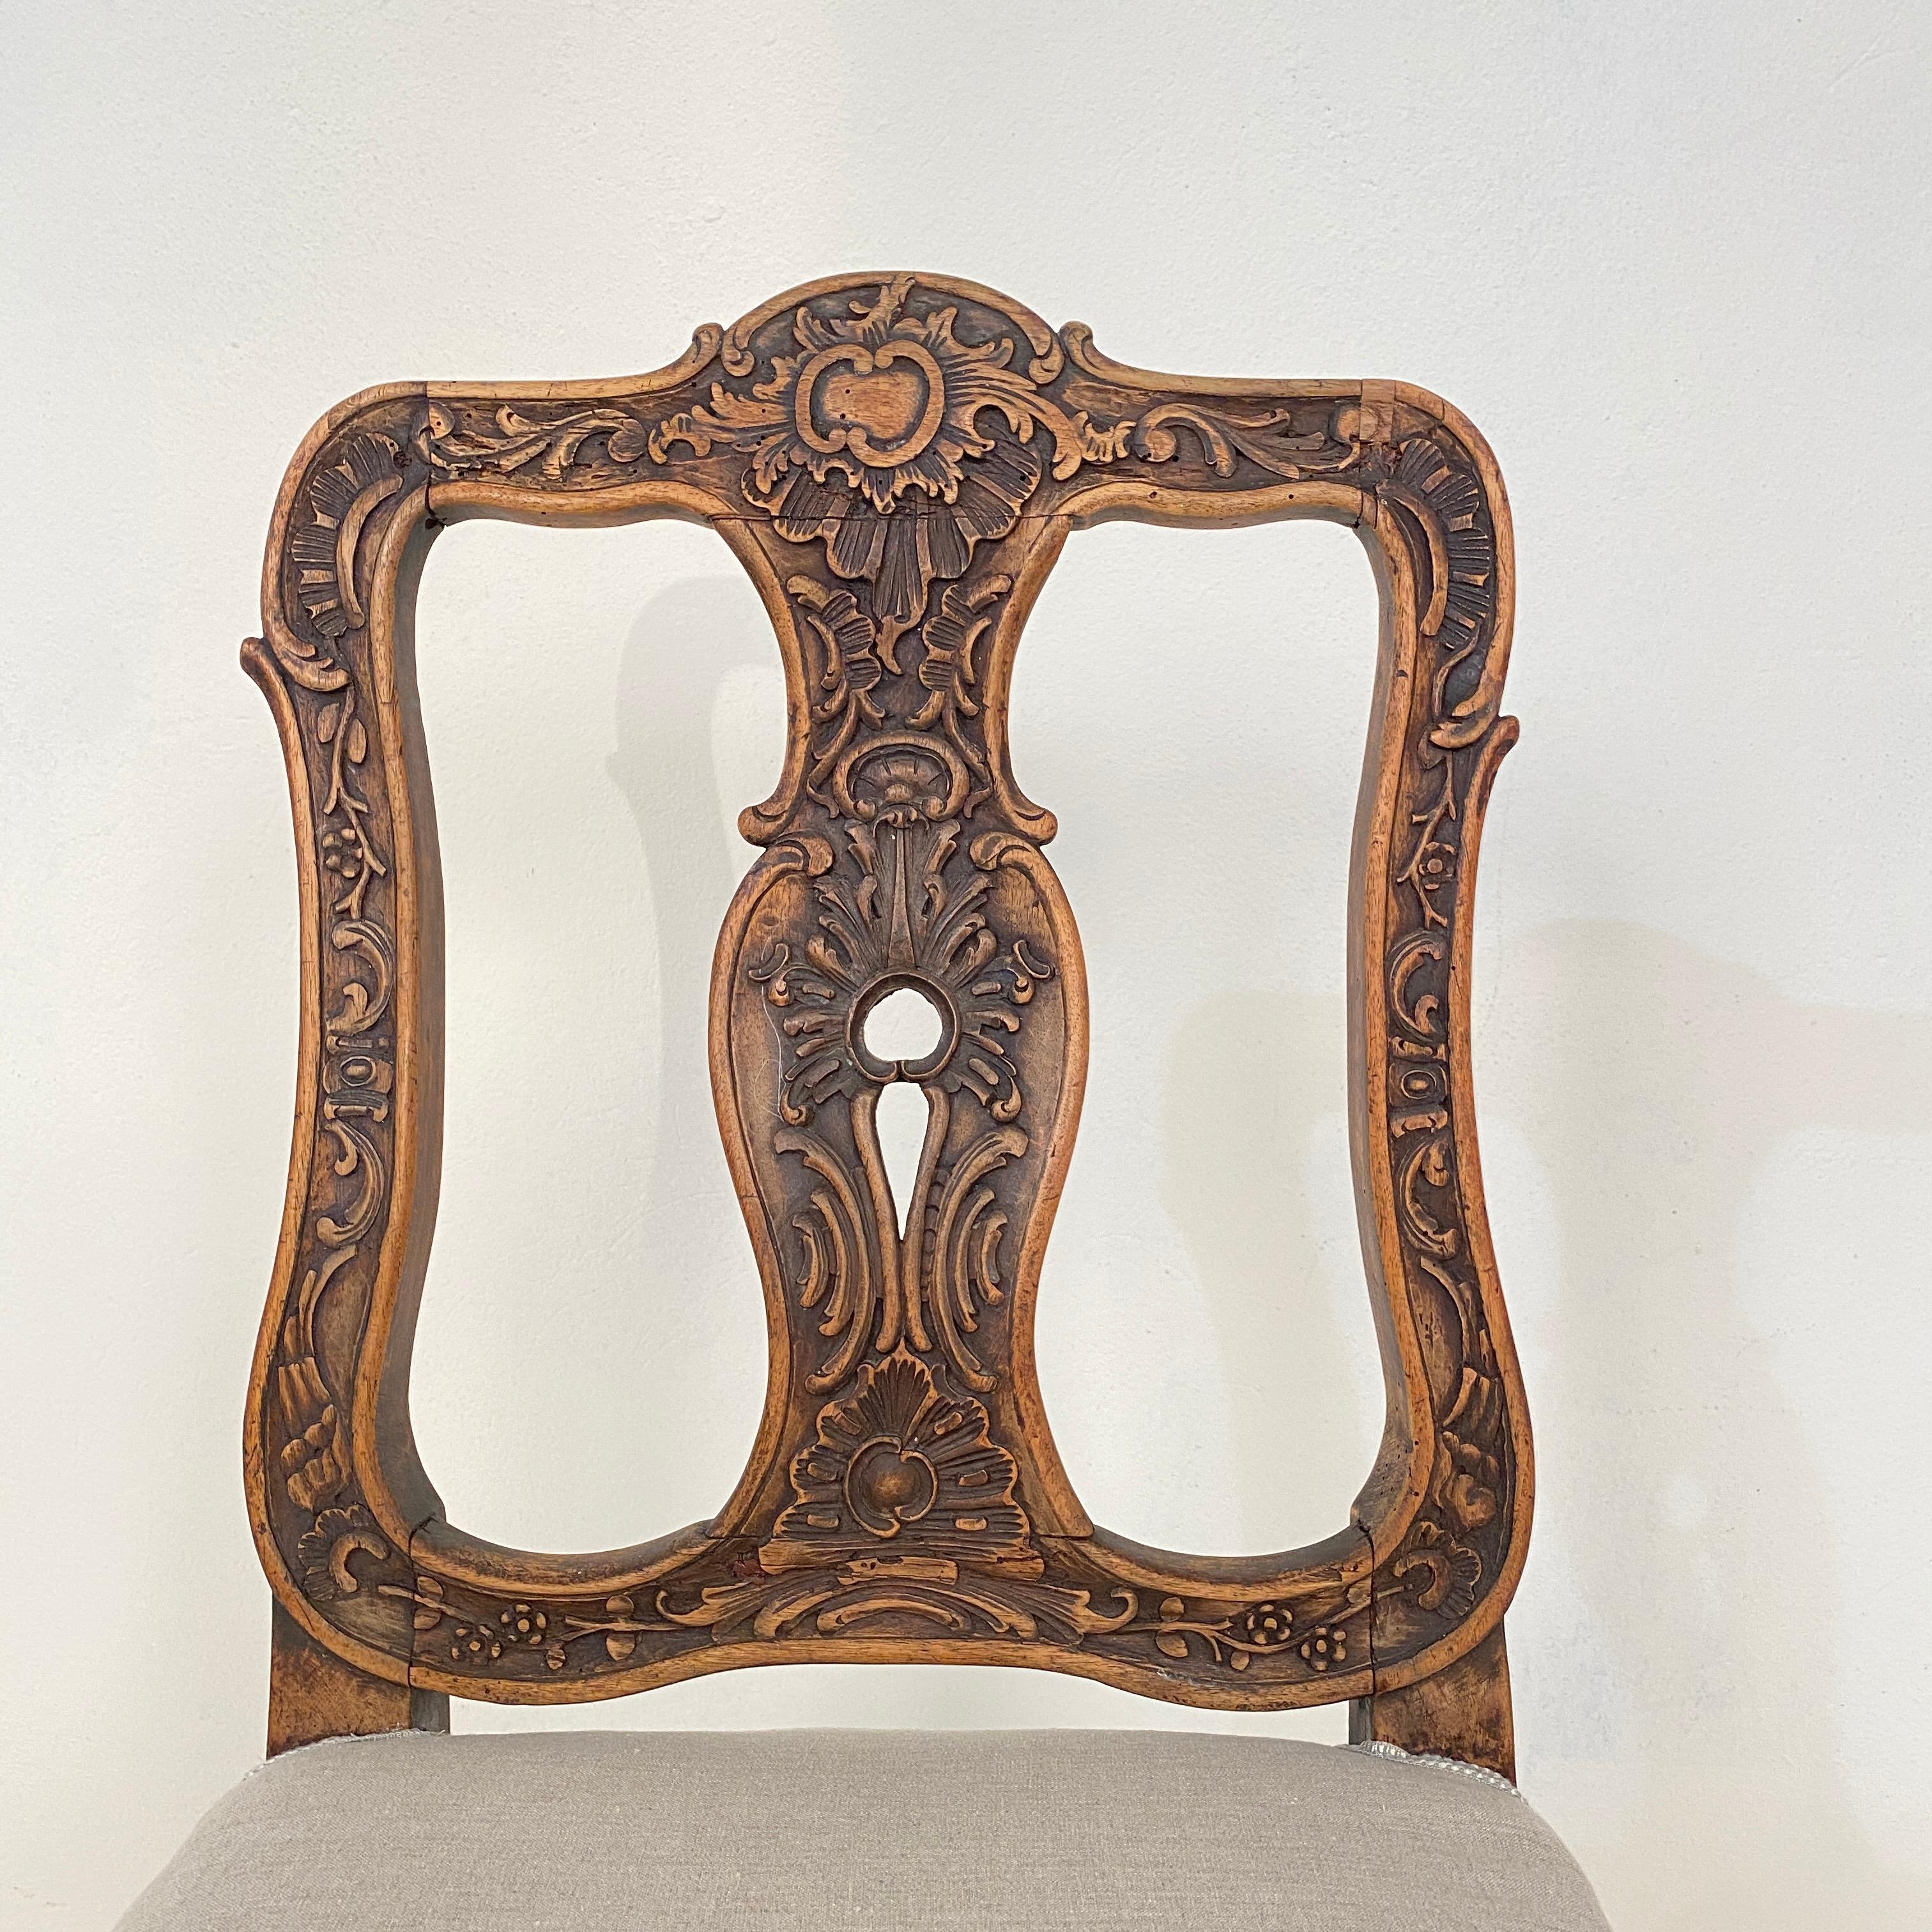 This 18th century German Baroque chair was made circa 1740 in South Germany.
It is beautifully carved in walnut and in its stunning original condition.
A unique piece which is a great eye-catcher for your antique, modern, Space Age or midcentury